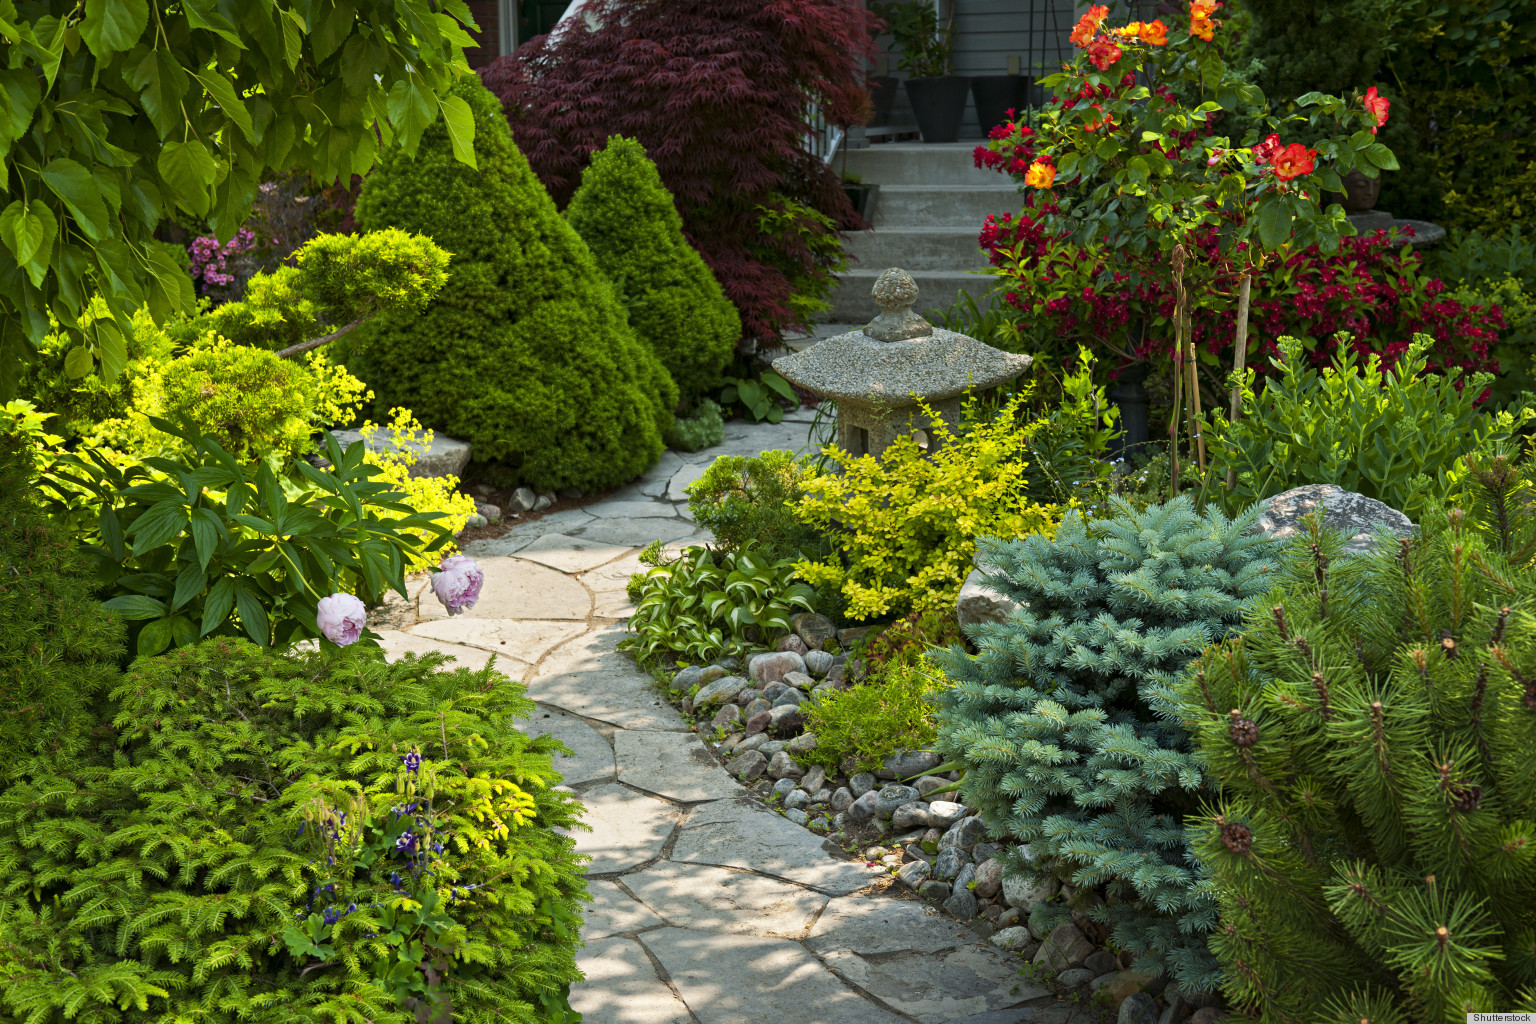 Weekend DIY Ideas That Will Inspire Your Inner Landscaper (PHOTOS)